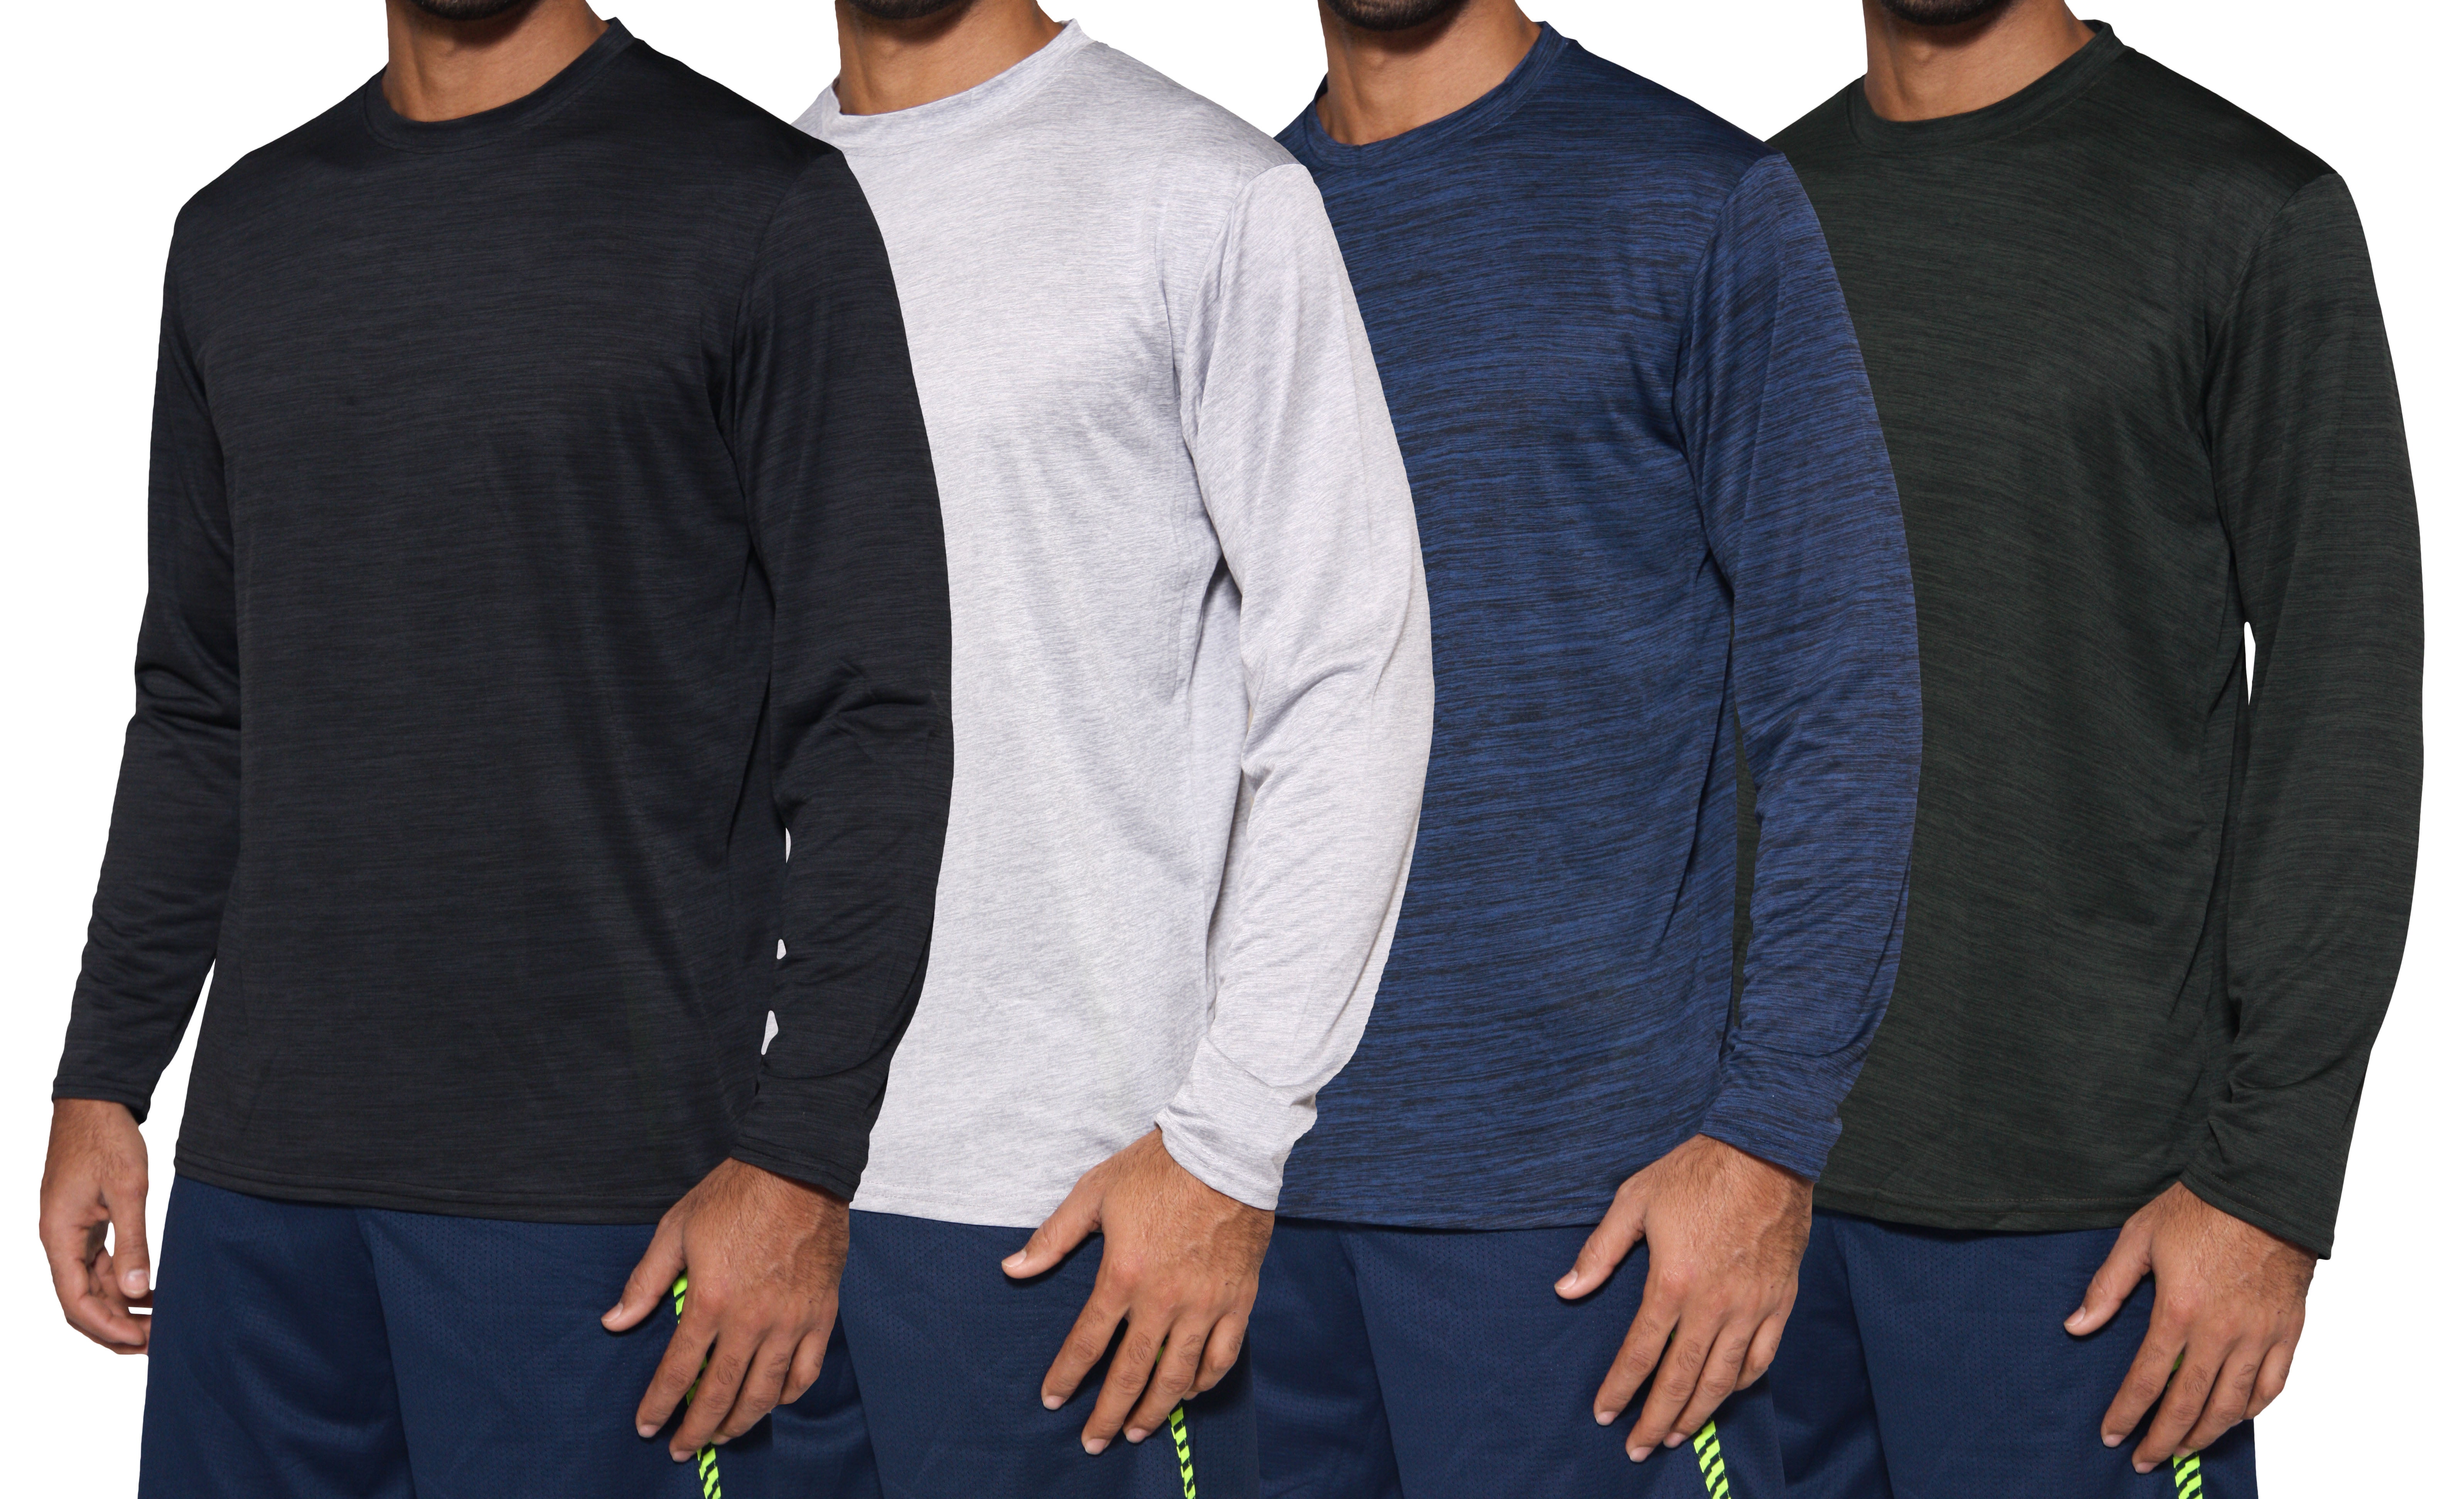 Real Essentials - 4 Pack: Men's Dry-Fit Moisture Wicking Performance ...